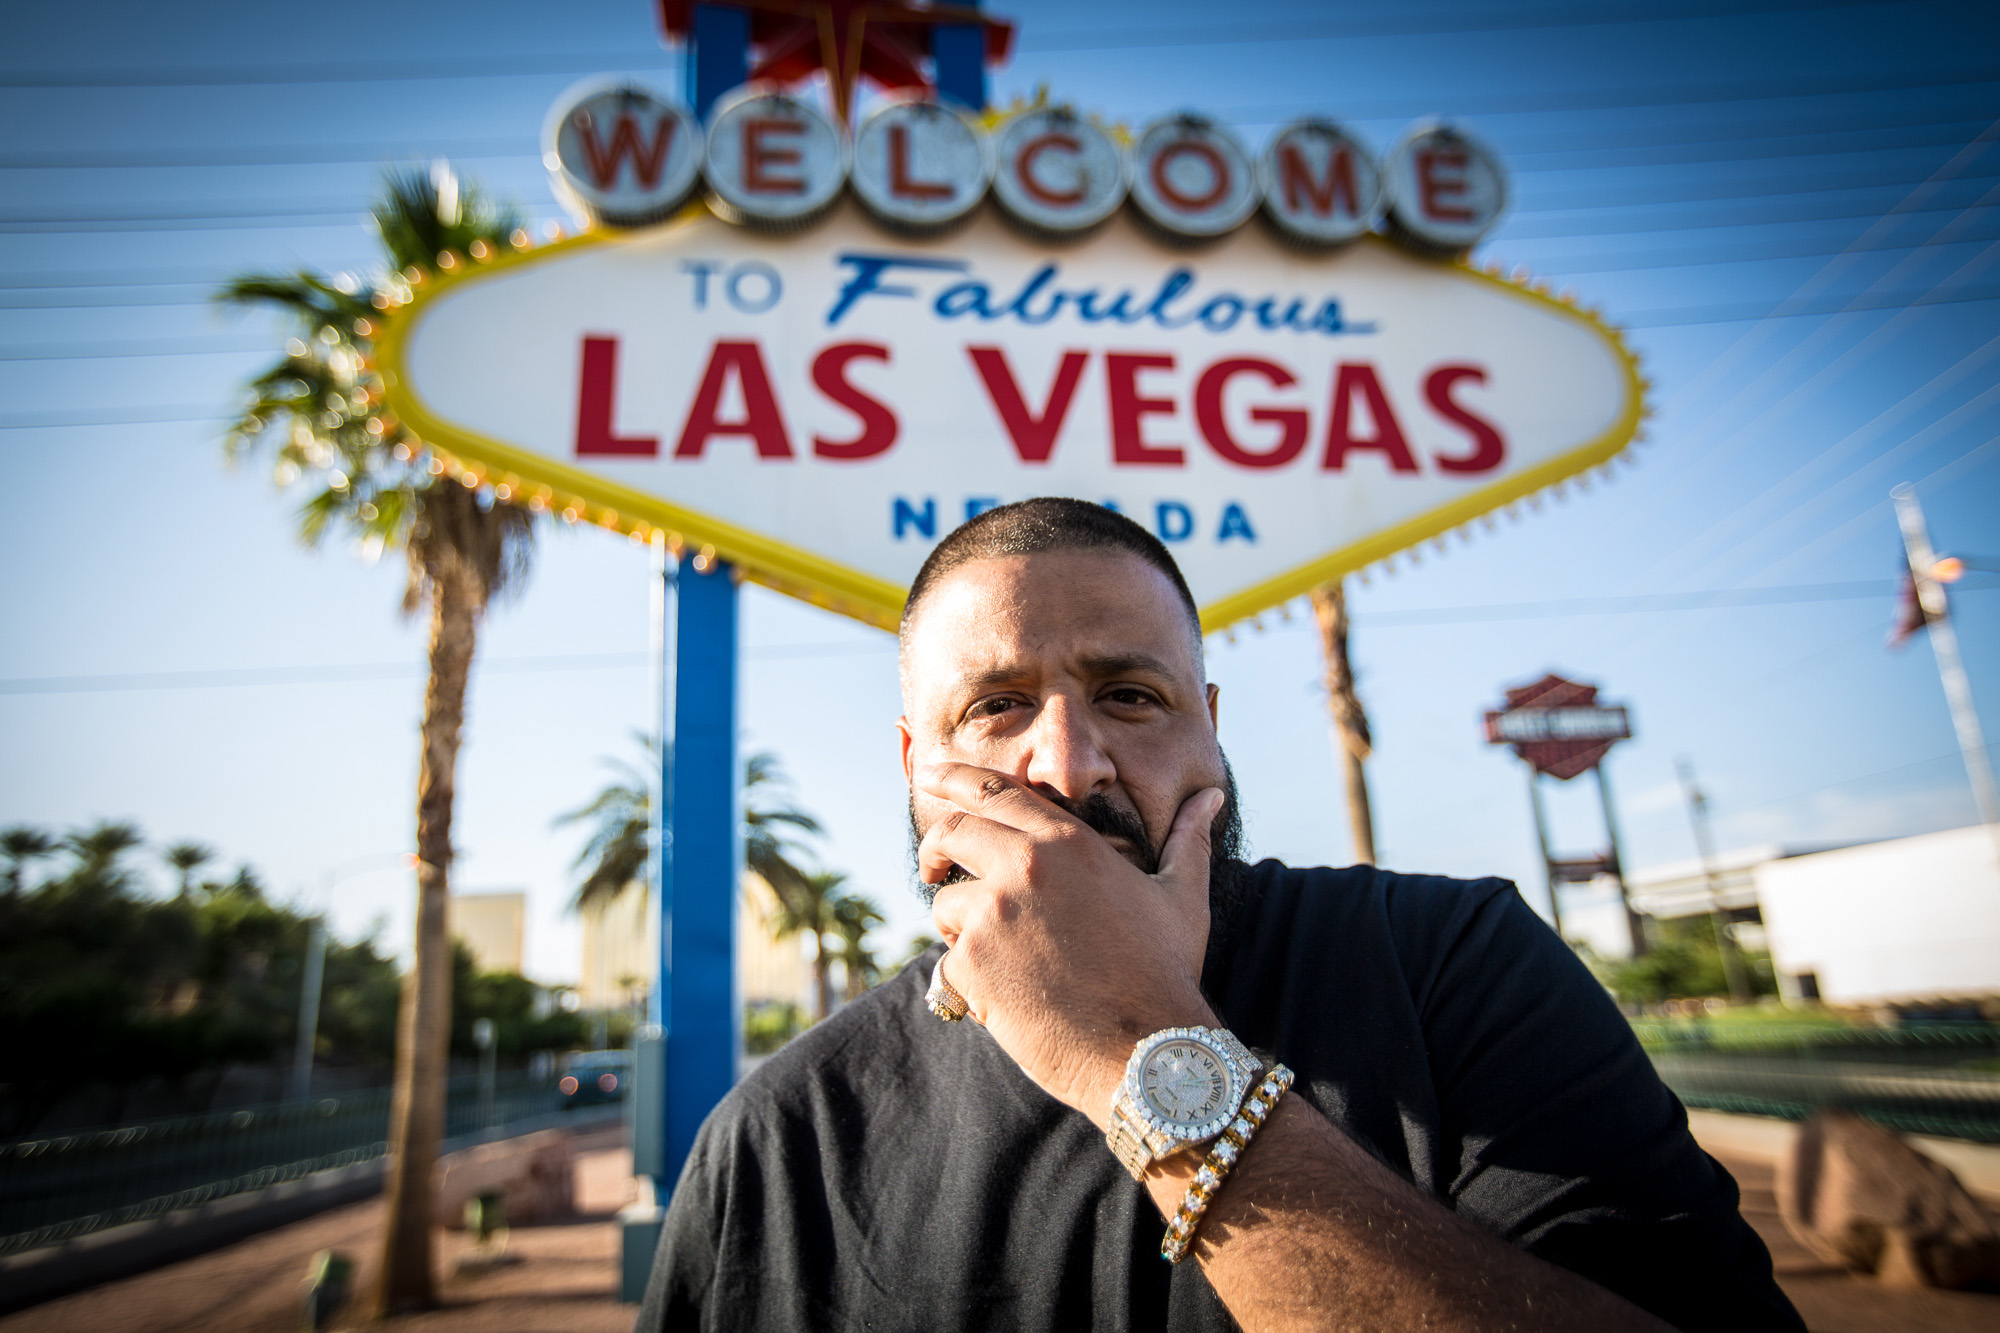 DJ Khaled launches official Las Vegas Snapchat account, snapping and sharing his personal Vegas story